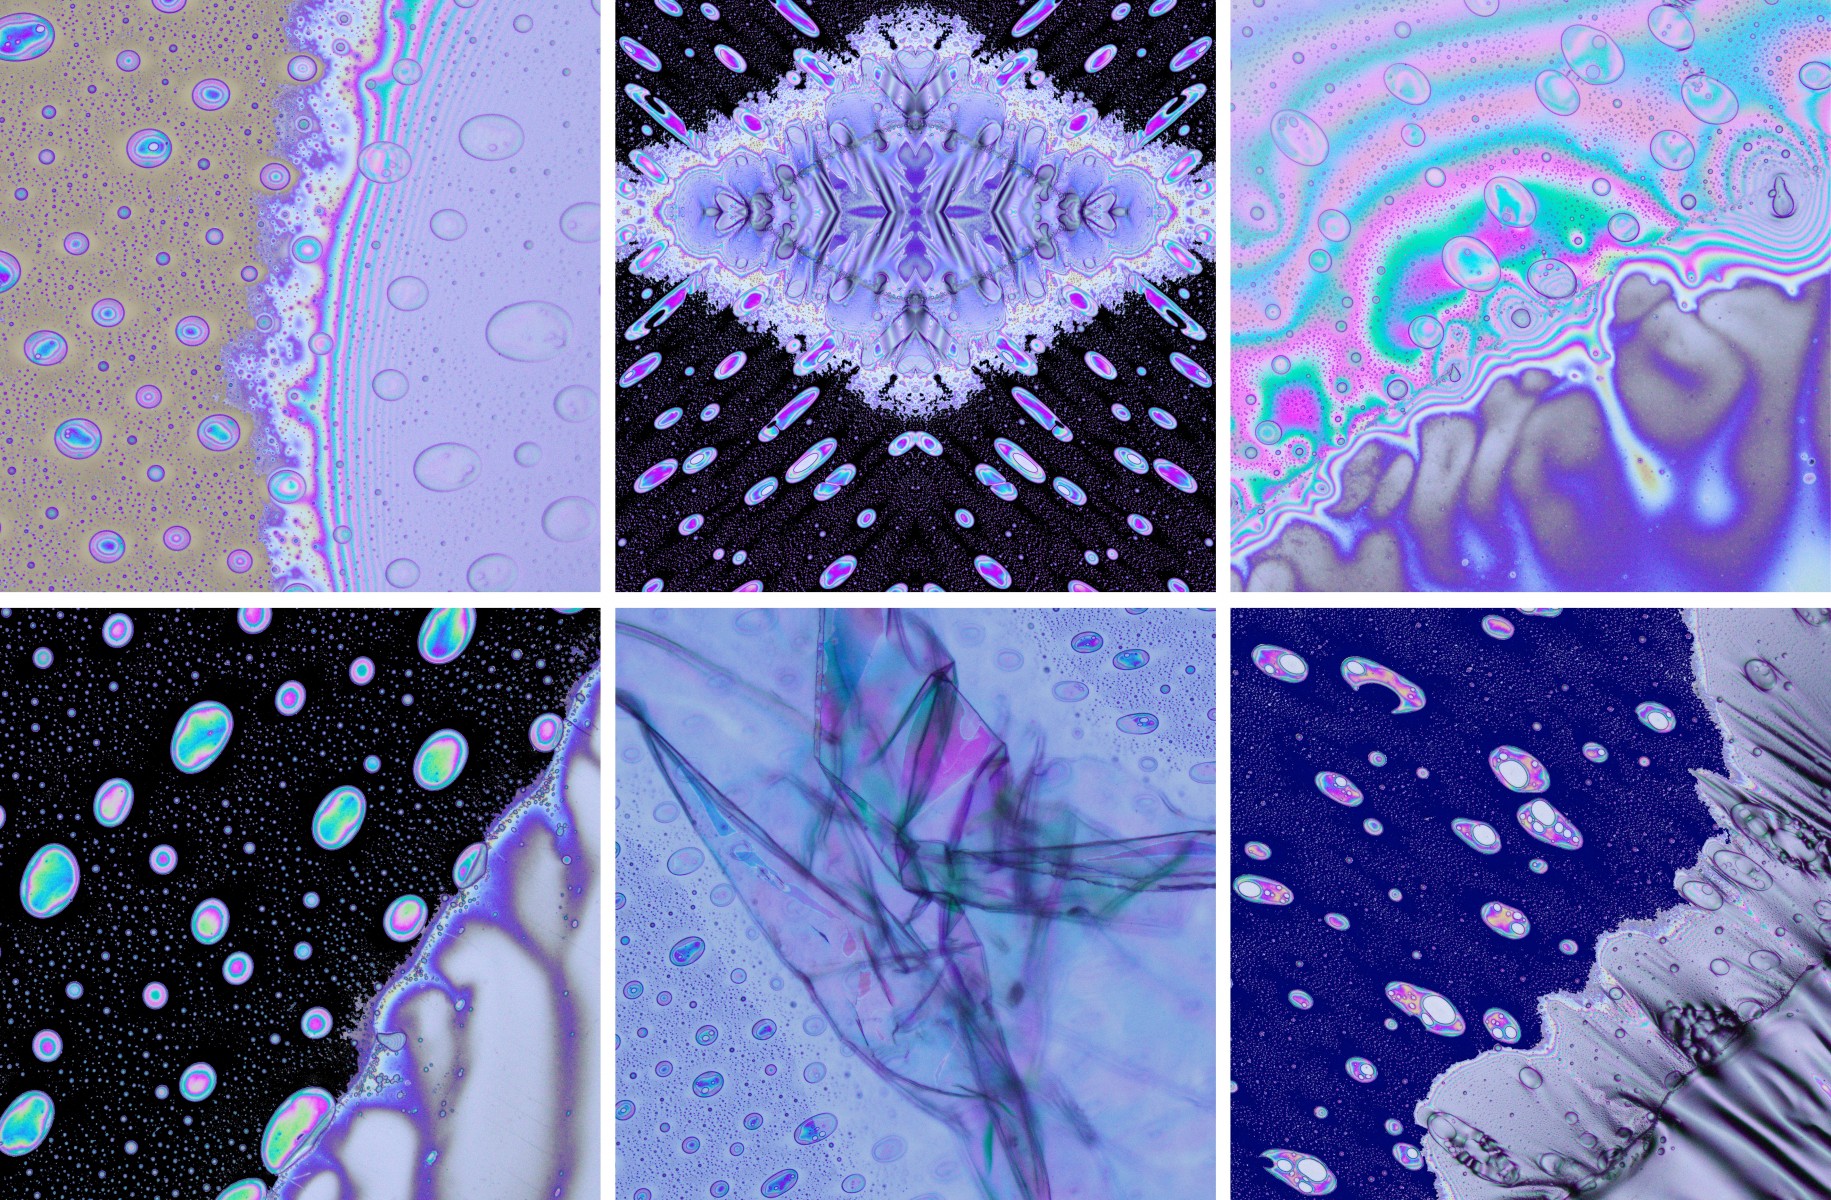 This collection of microscope photos depicts the  moments of dynamic particles moving towards various freestanding membranes at the air-liquid interface